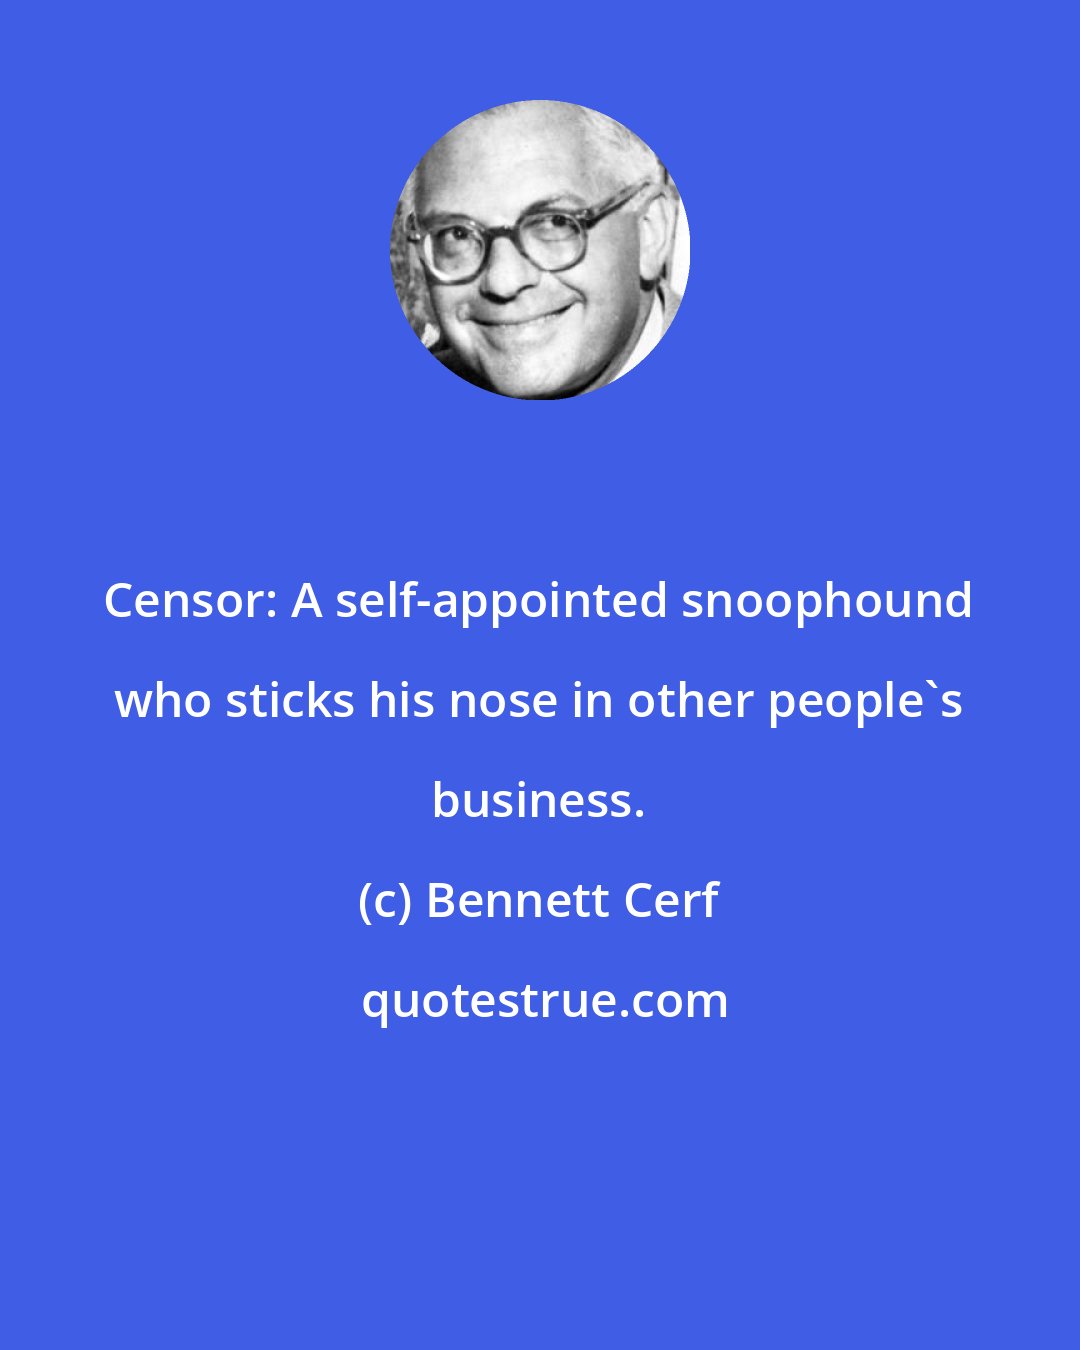 Bennett Cerf: Censor: A self-appointed snoophound who sticks his nose in other people's business.